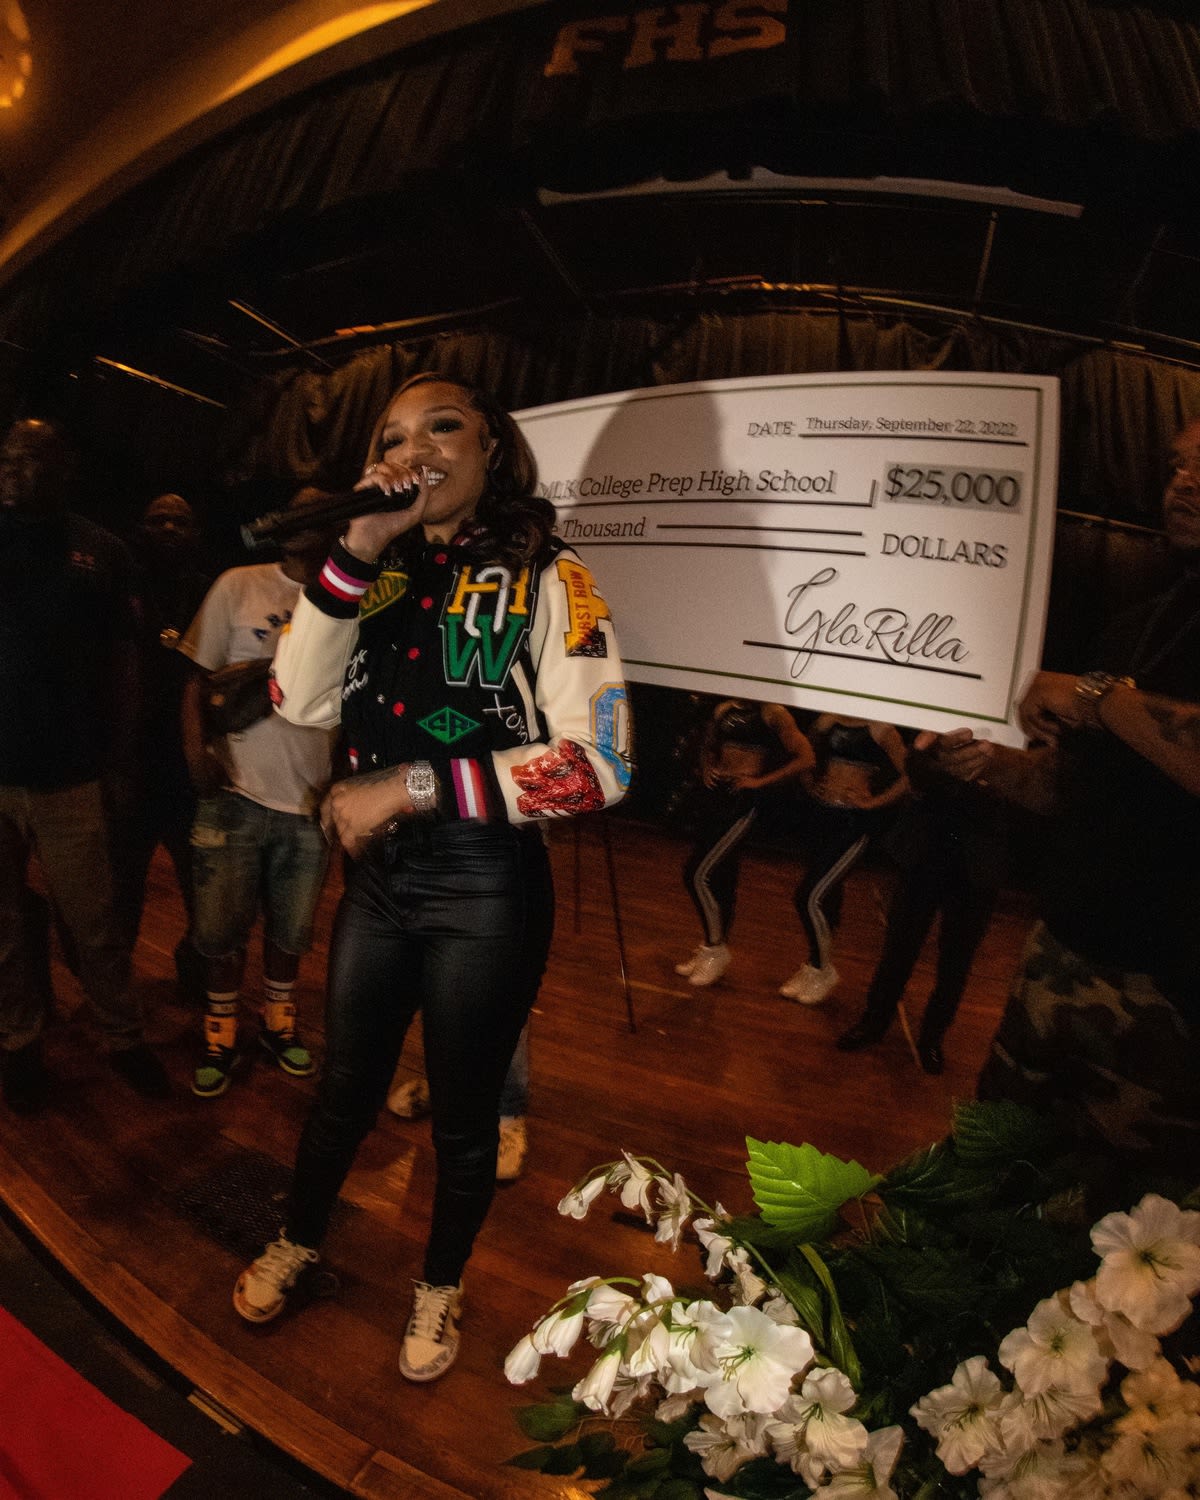 GloRilla with the big check behind her